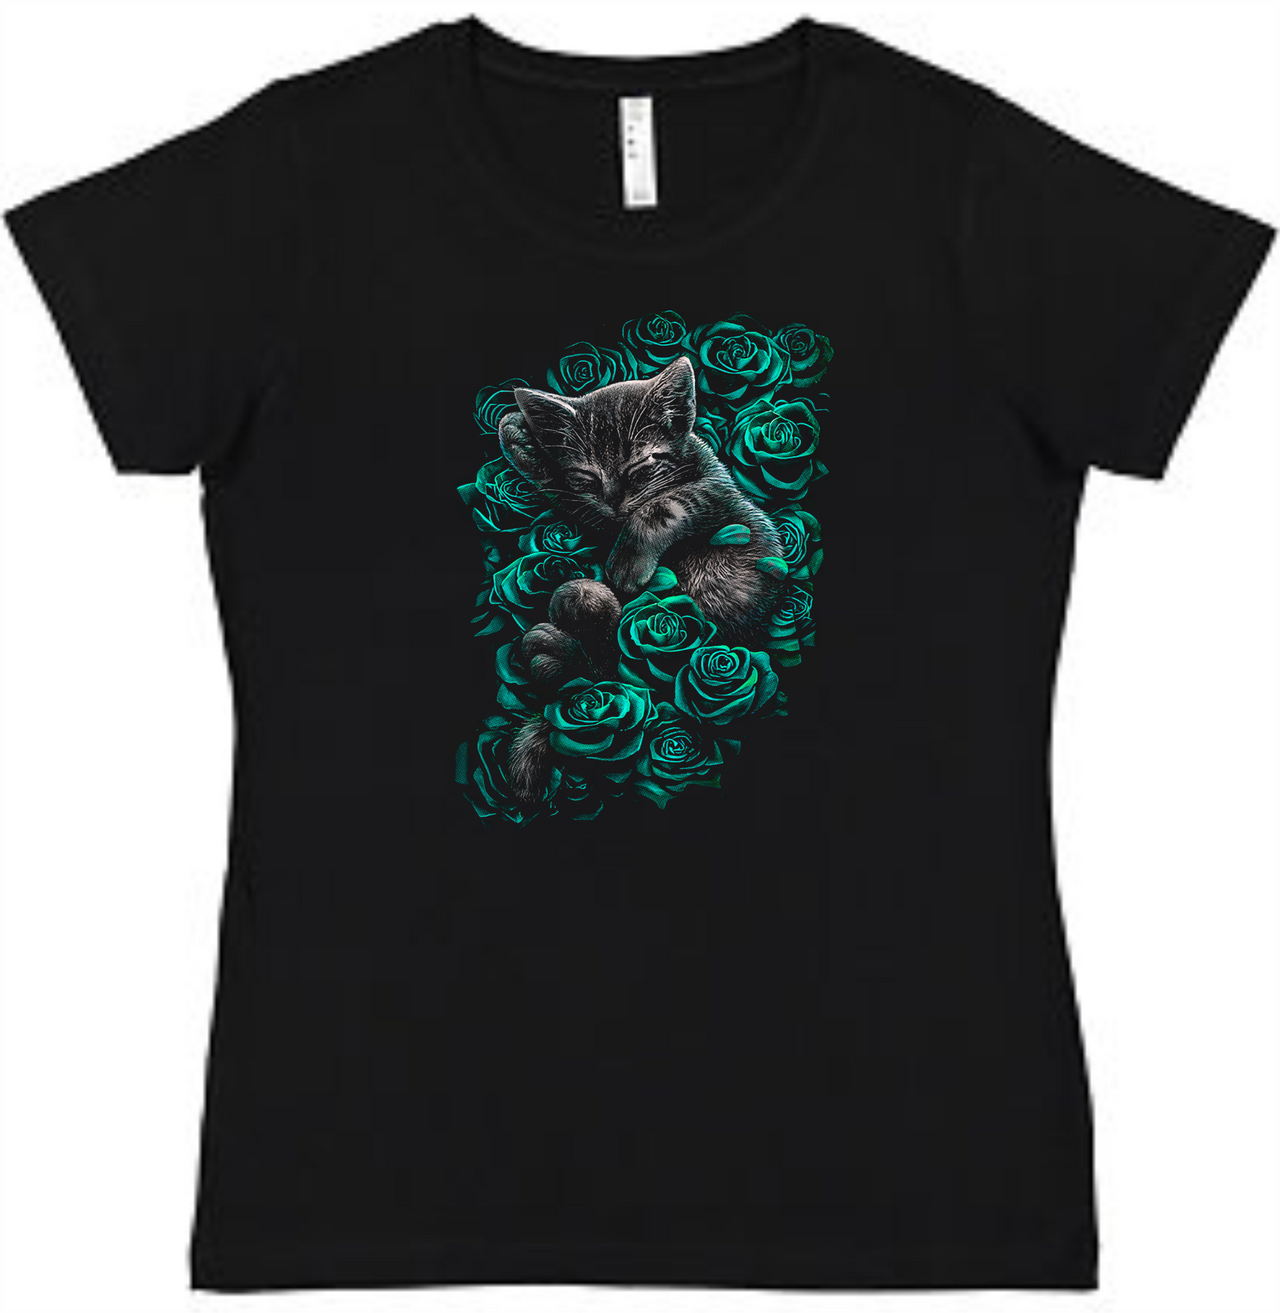 Kitty and Roses Ladies Tee Ladies Shirt by Akron Pride Custom Tees | Akron Pride Custom Tees